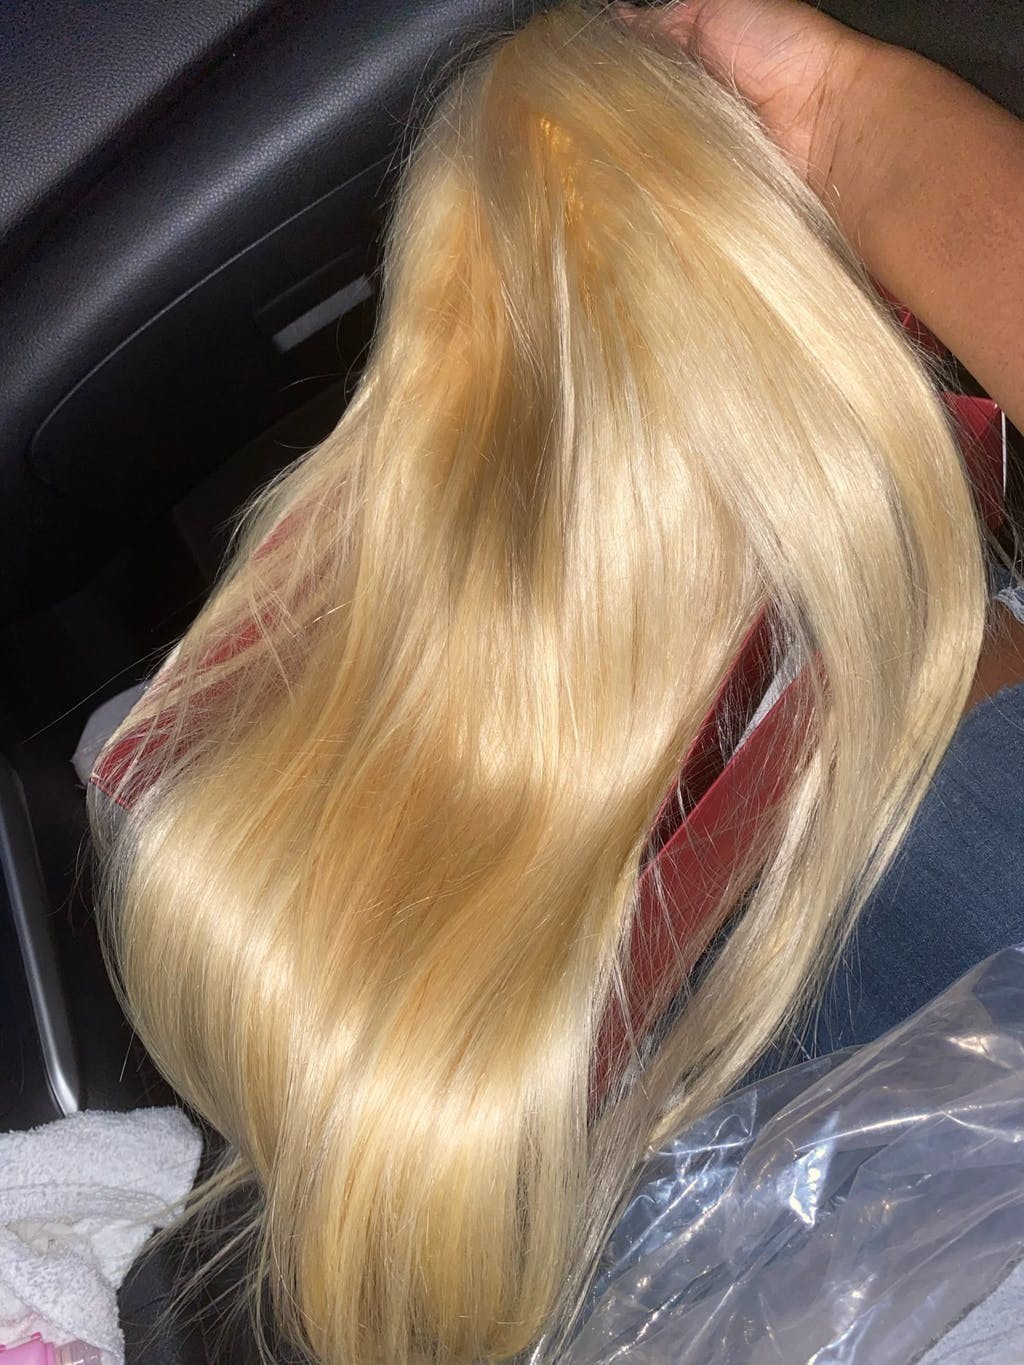 613 blonde lace front wig